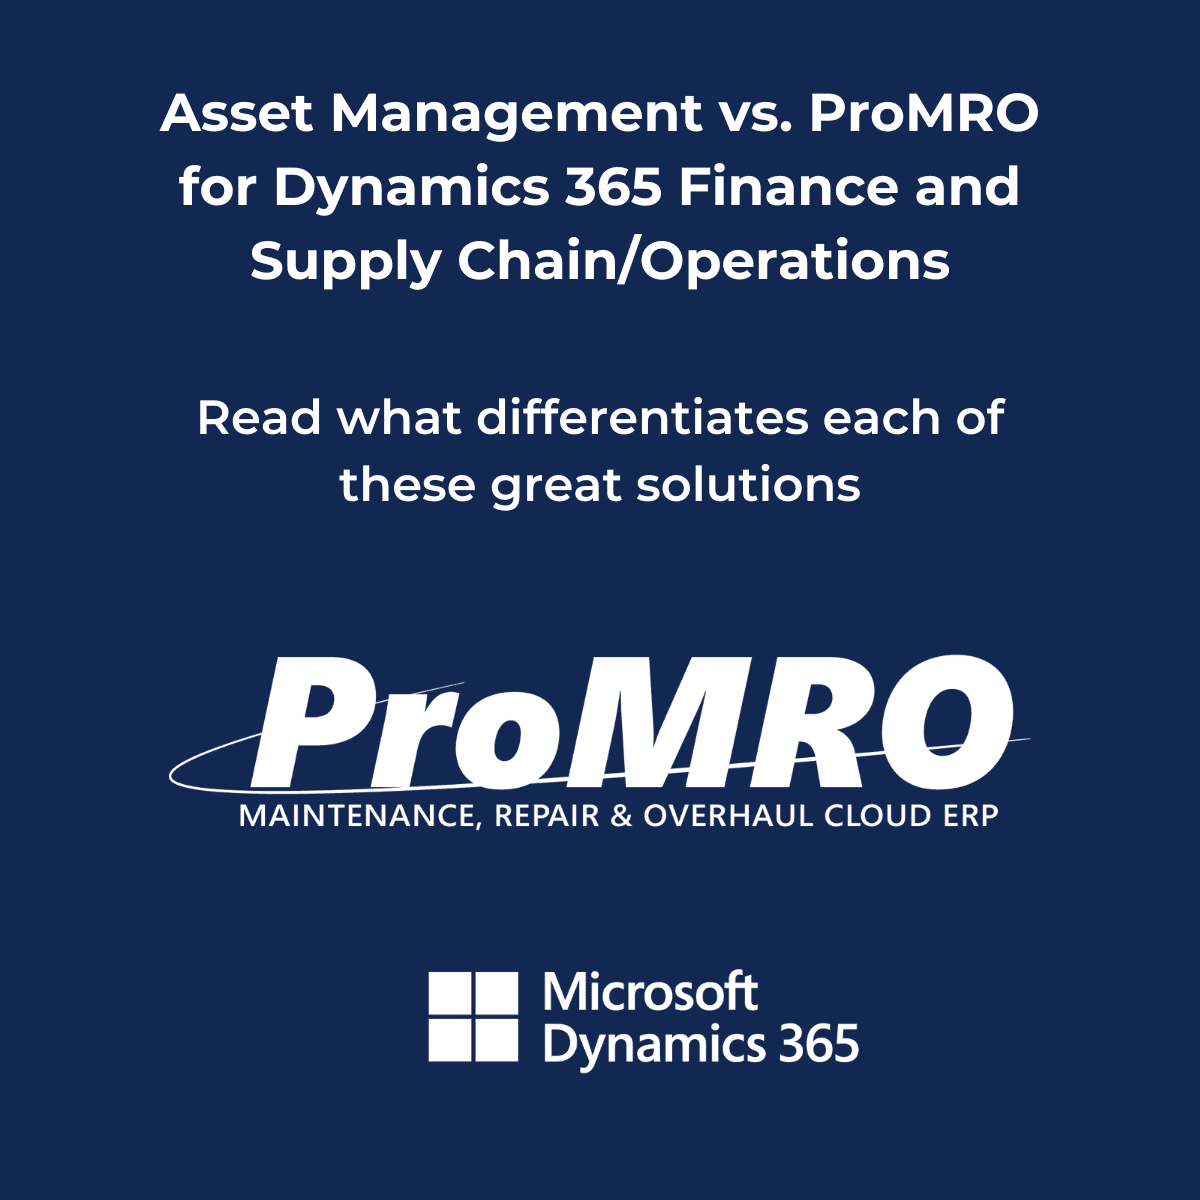 ProMRO and Asset Management for Dynamics 365 Finance and Supply Chain